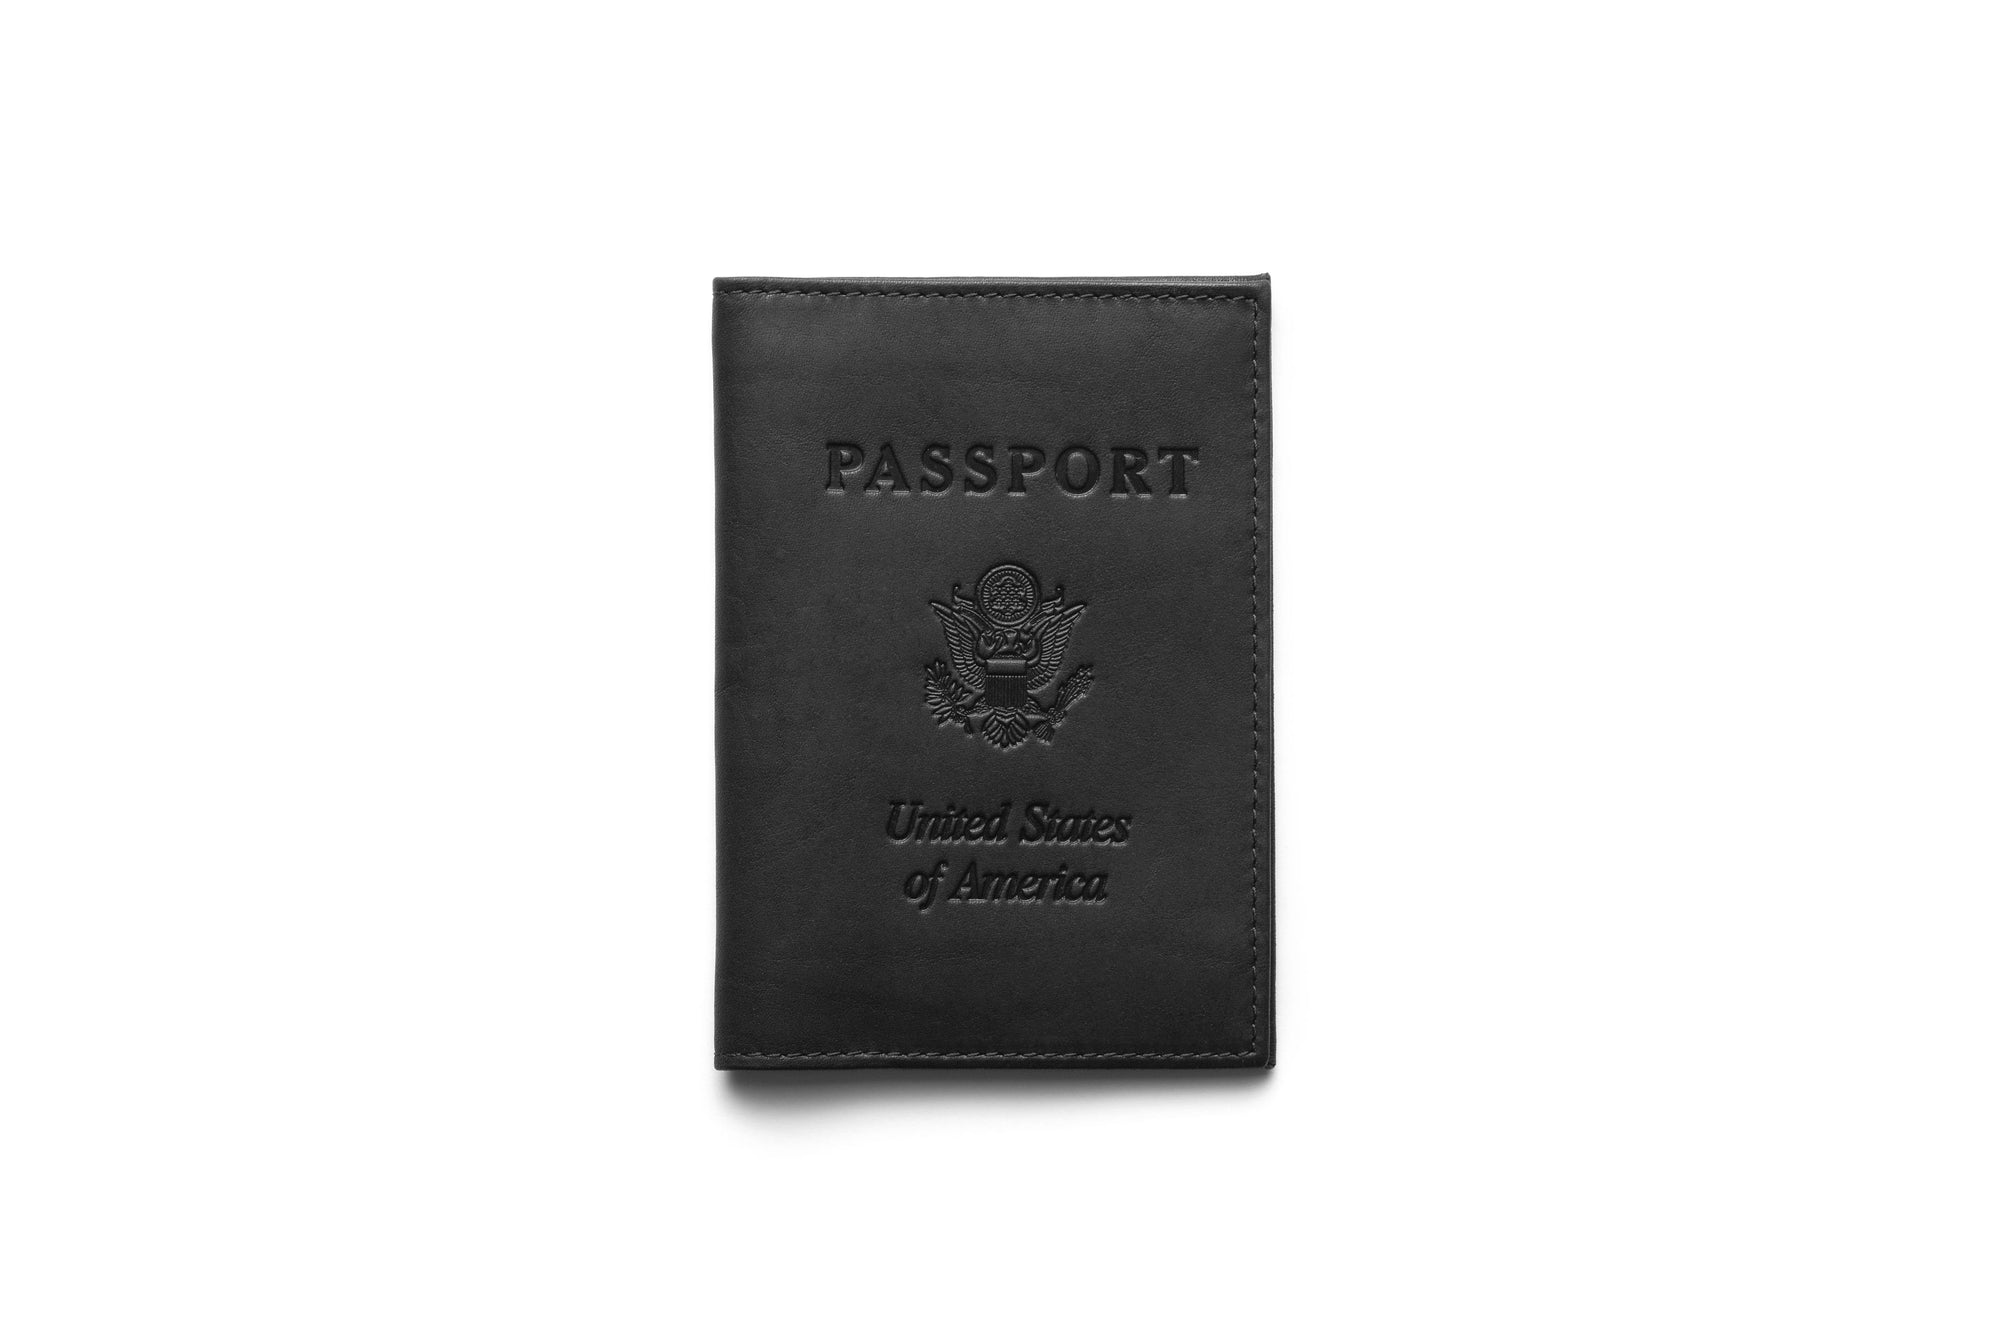 Passport cover leather small bag